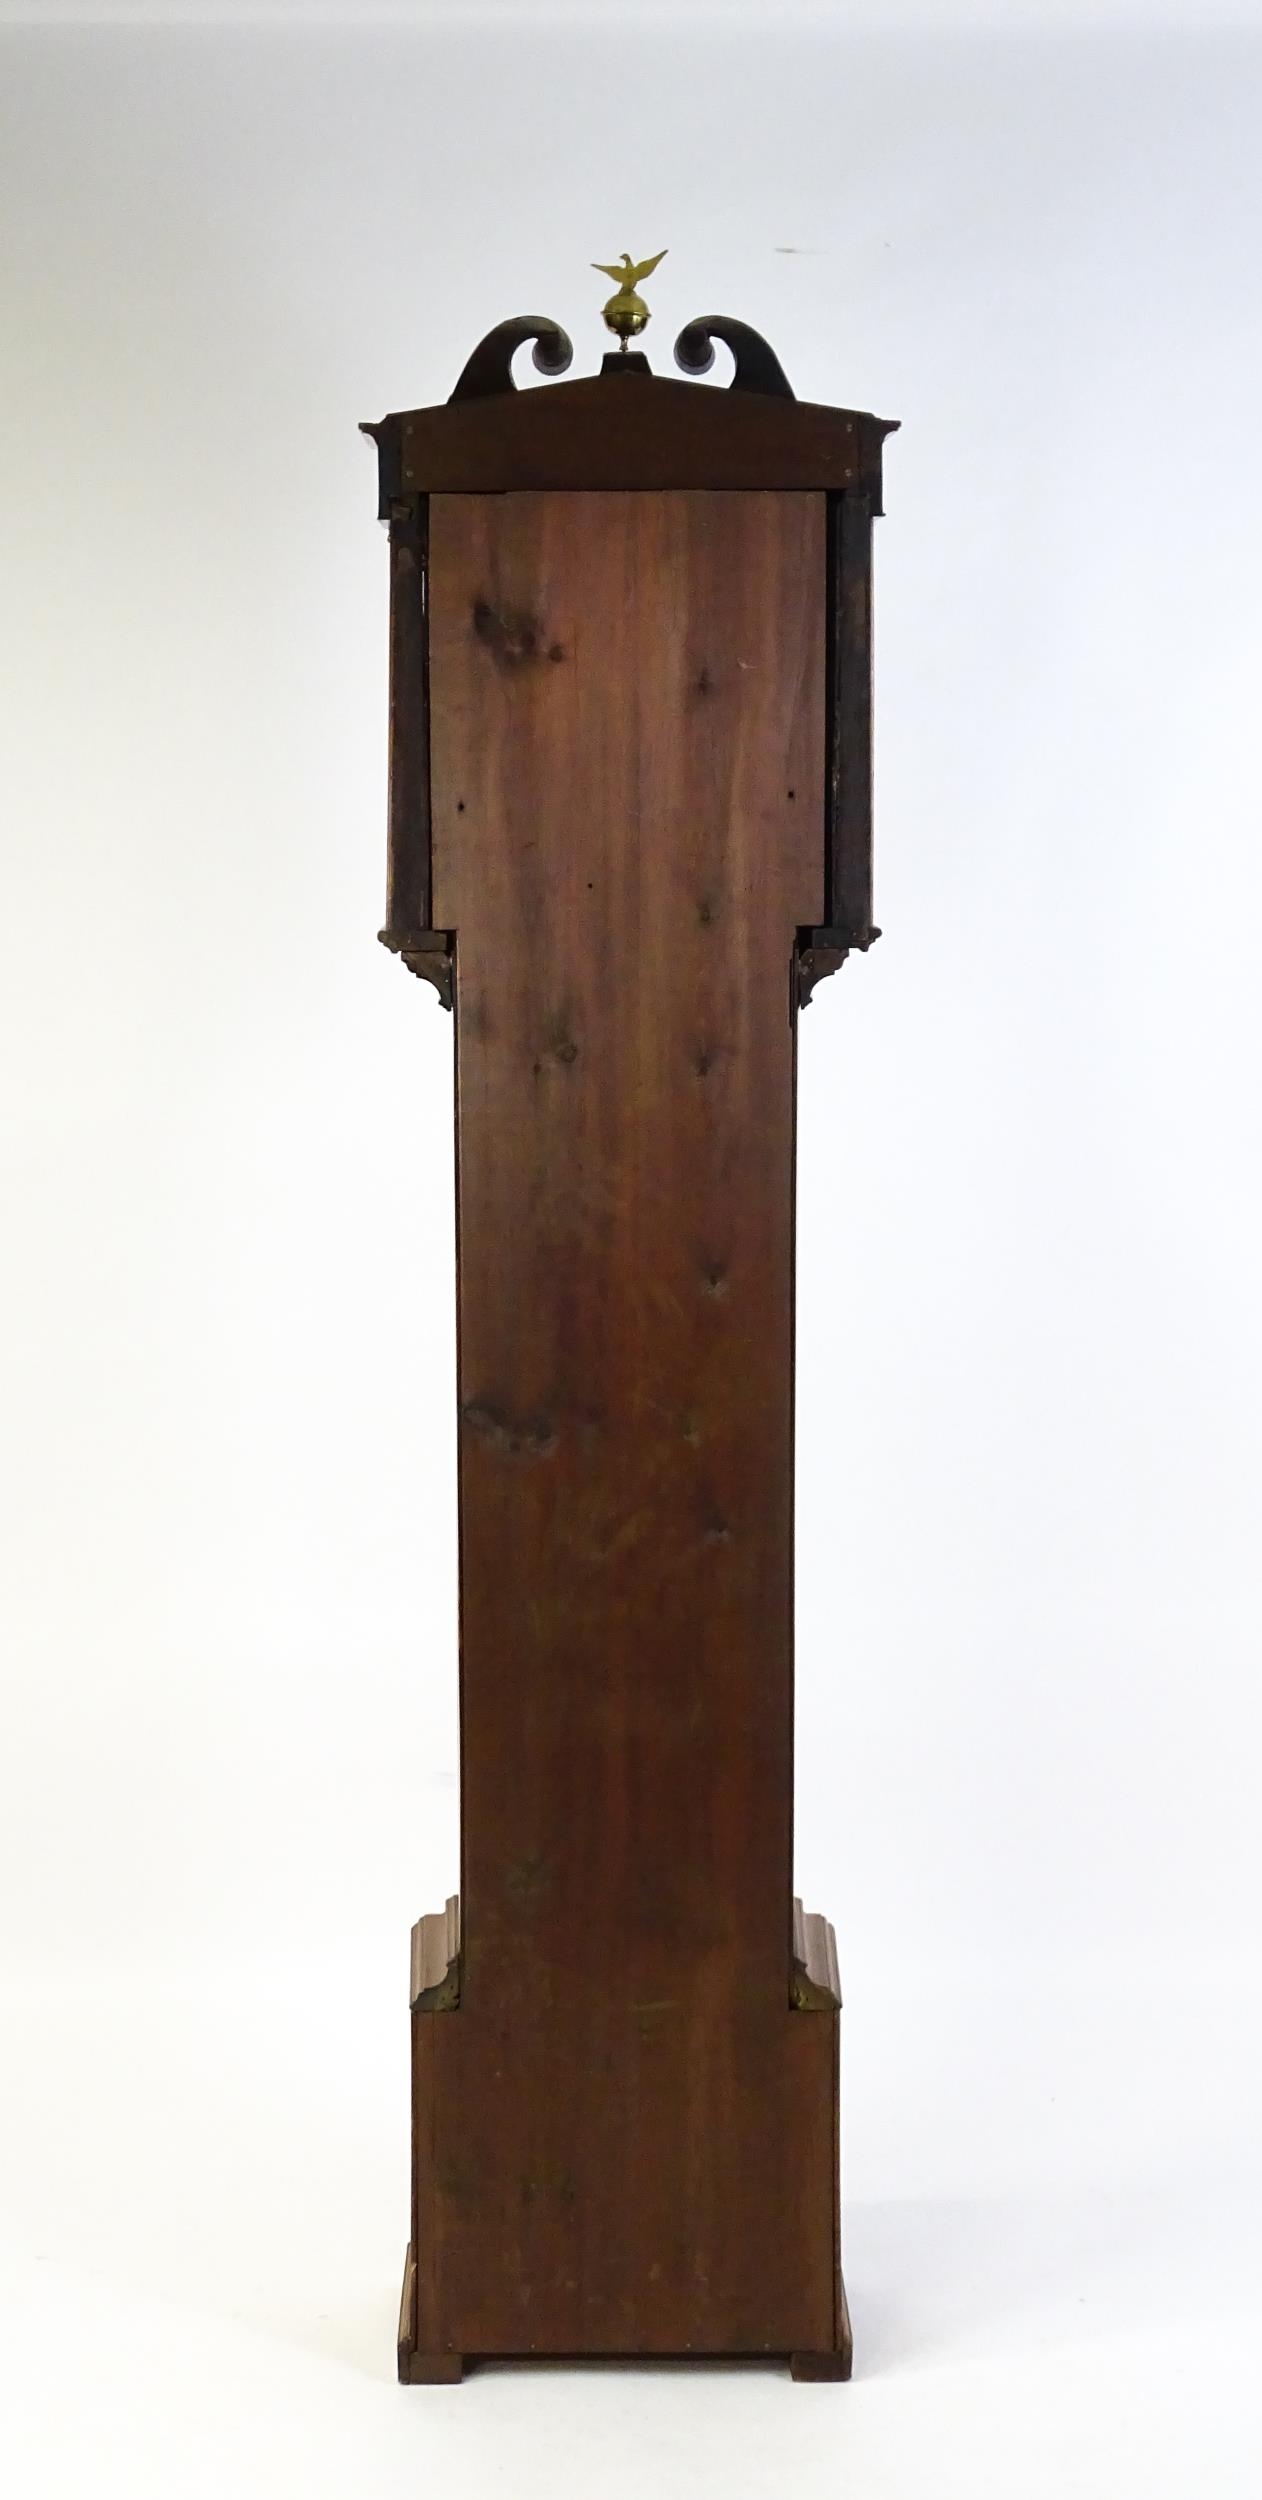 Francis Henderson - Mussleborough : A late 18th / early 19thC walnut cased 8-day longcase clock. The - Image 12 of 18